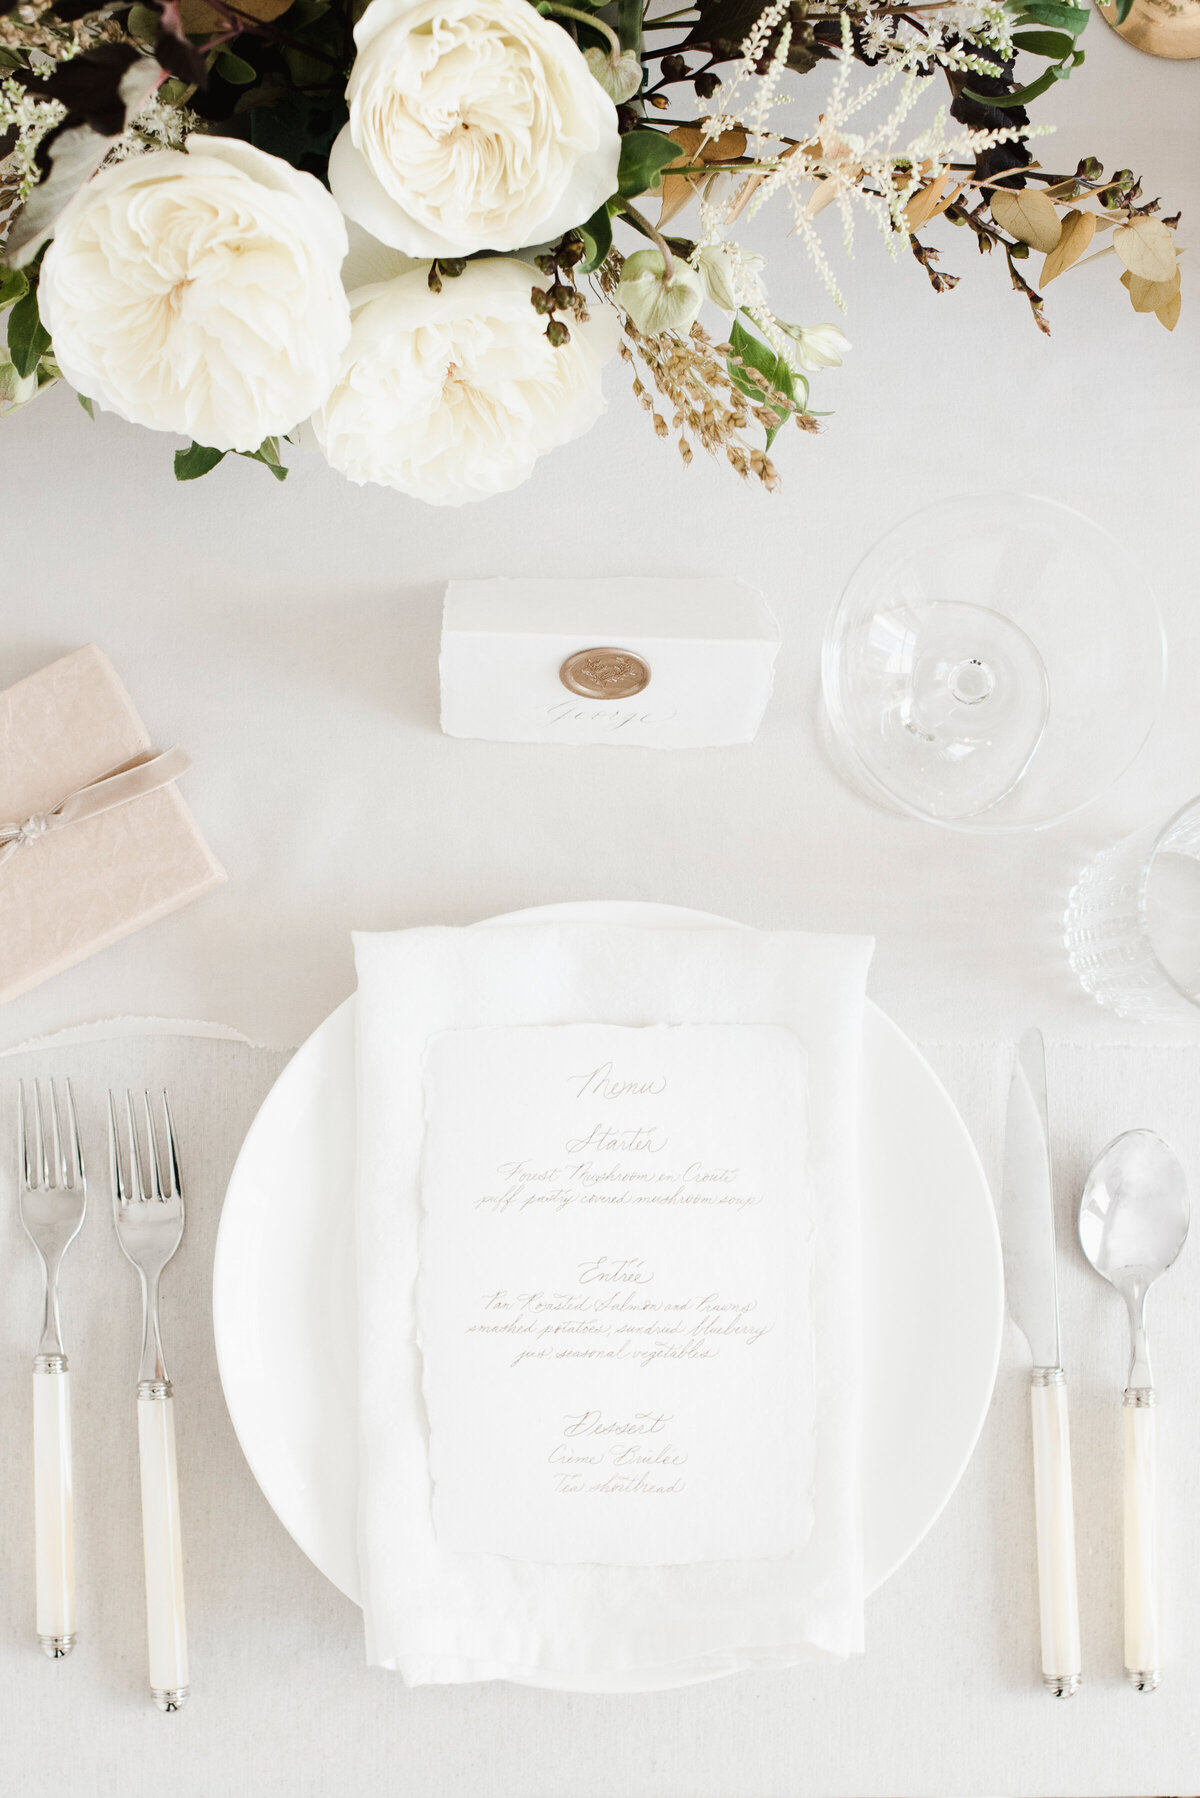 sharpe-stationery-and-printing-wedding-table-setting-with- wax-seal